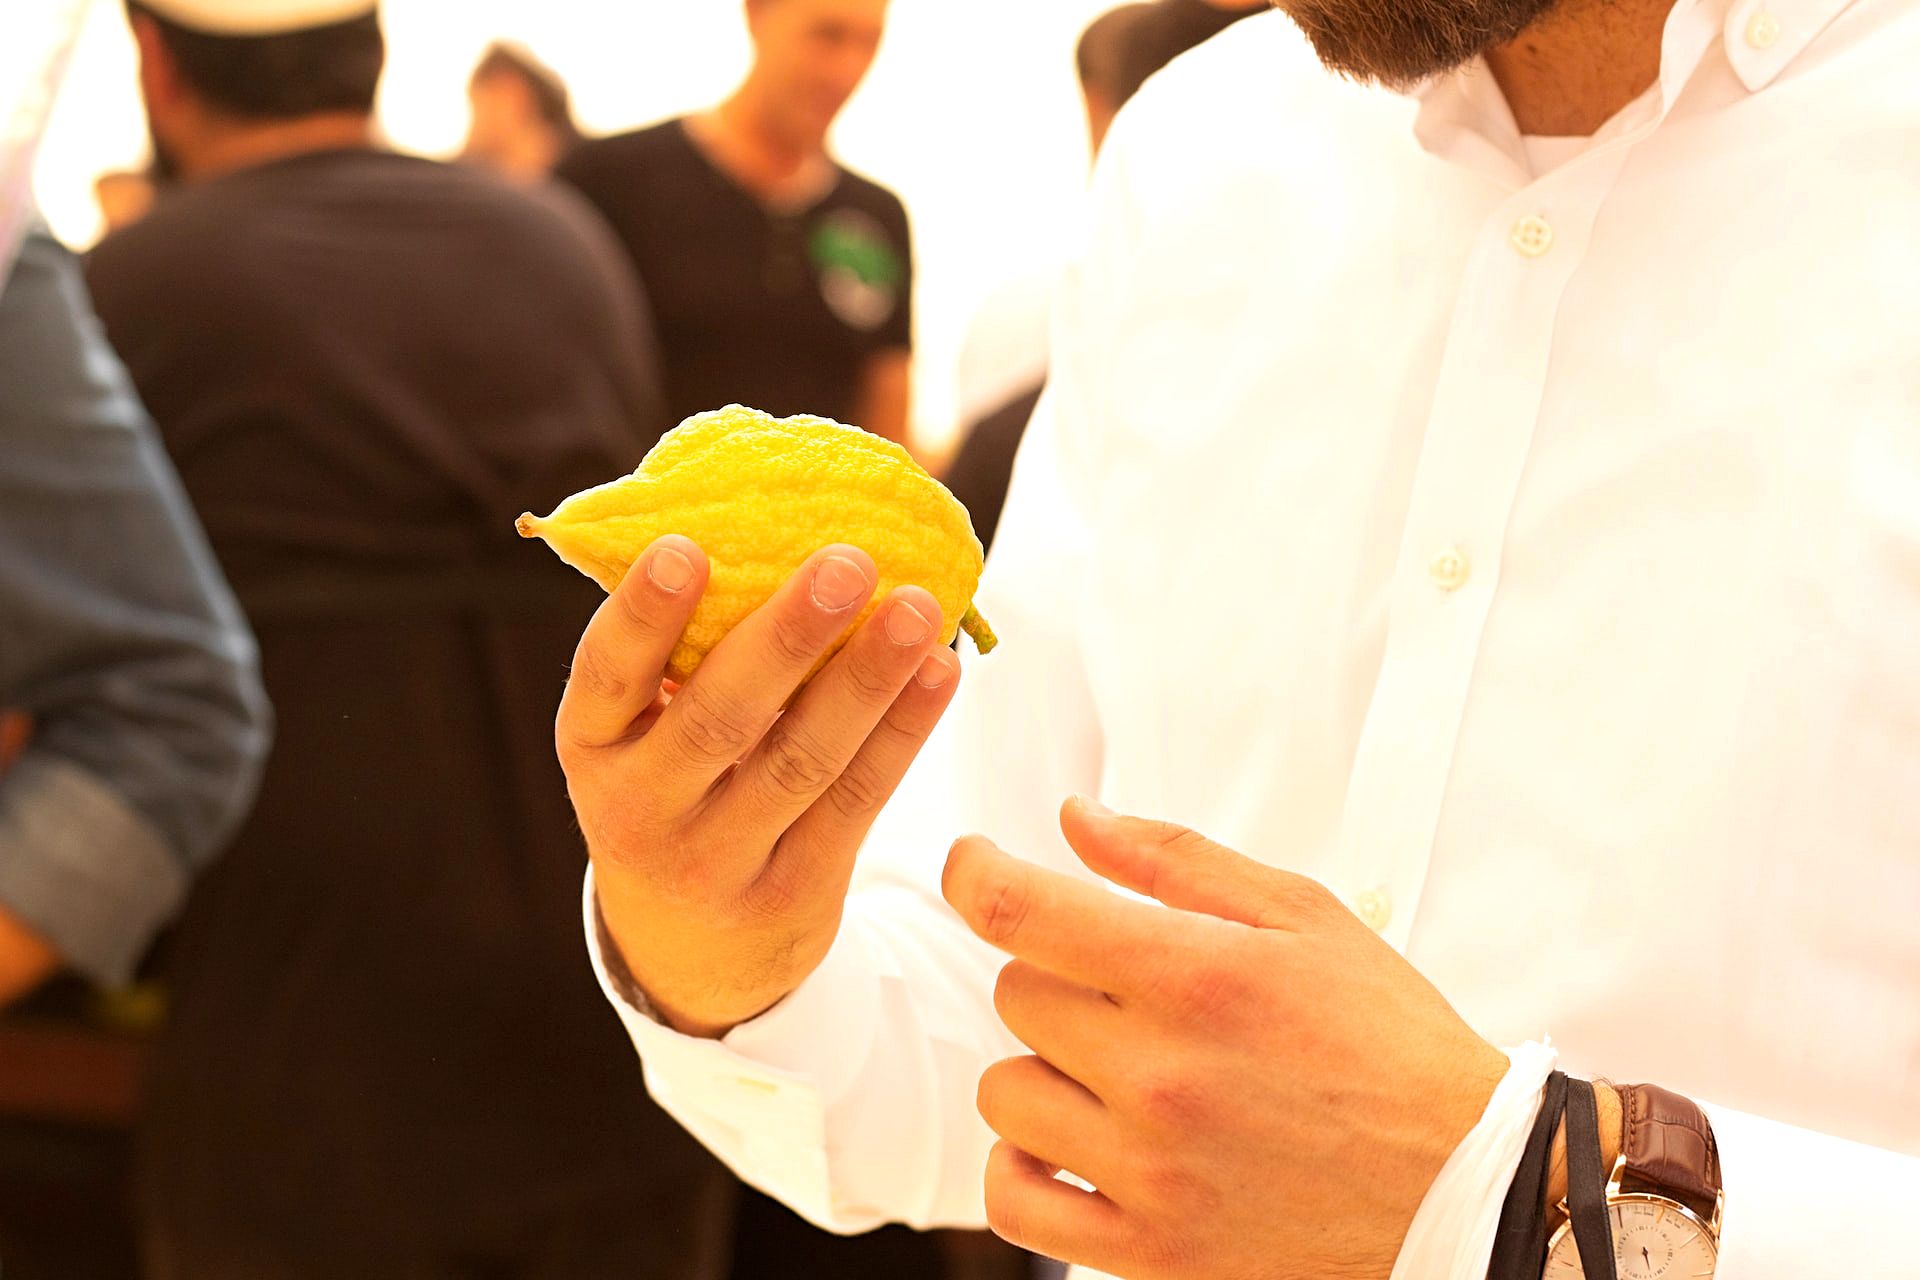 A man chooses an etrog in Sukkot, the four species